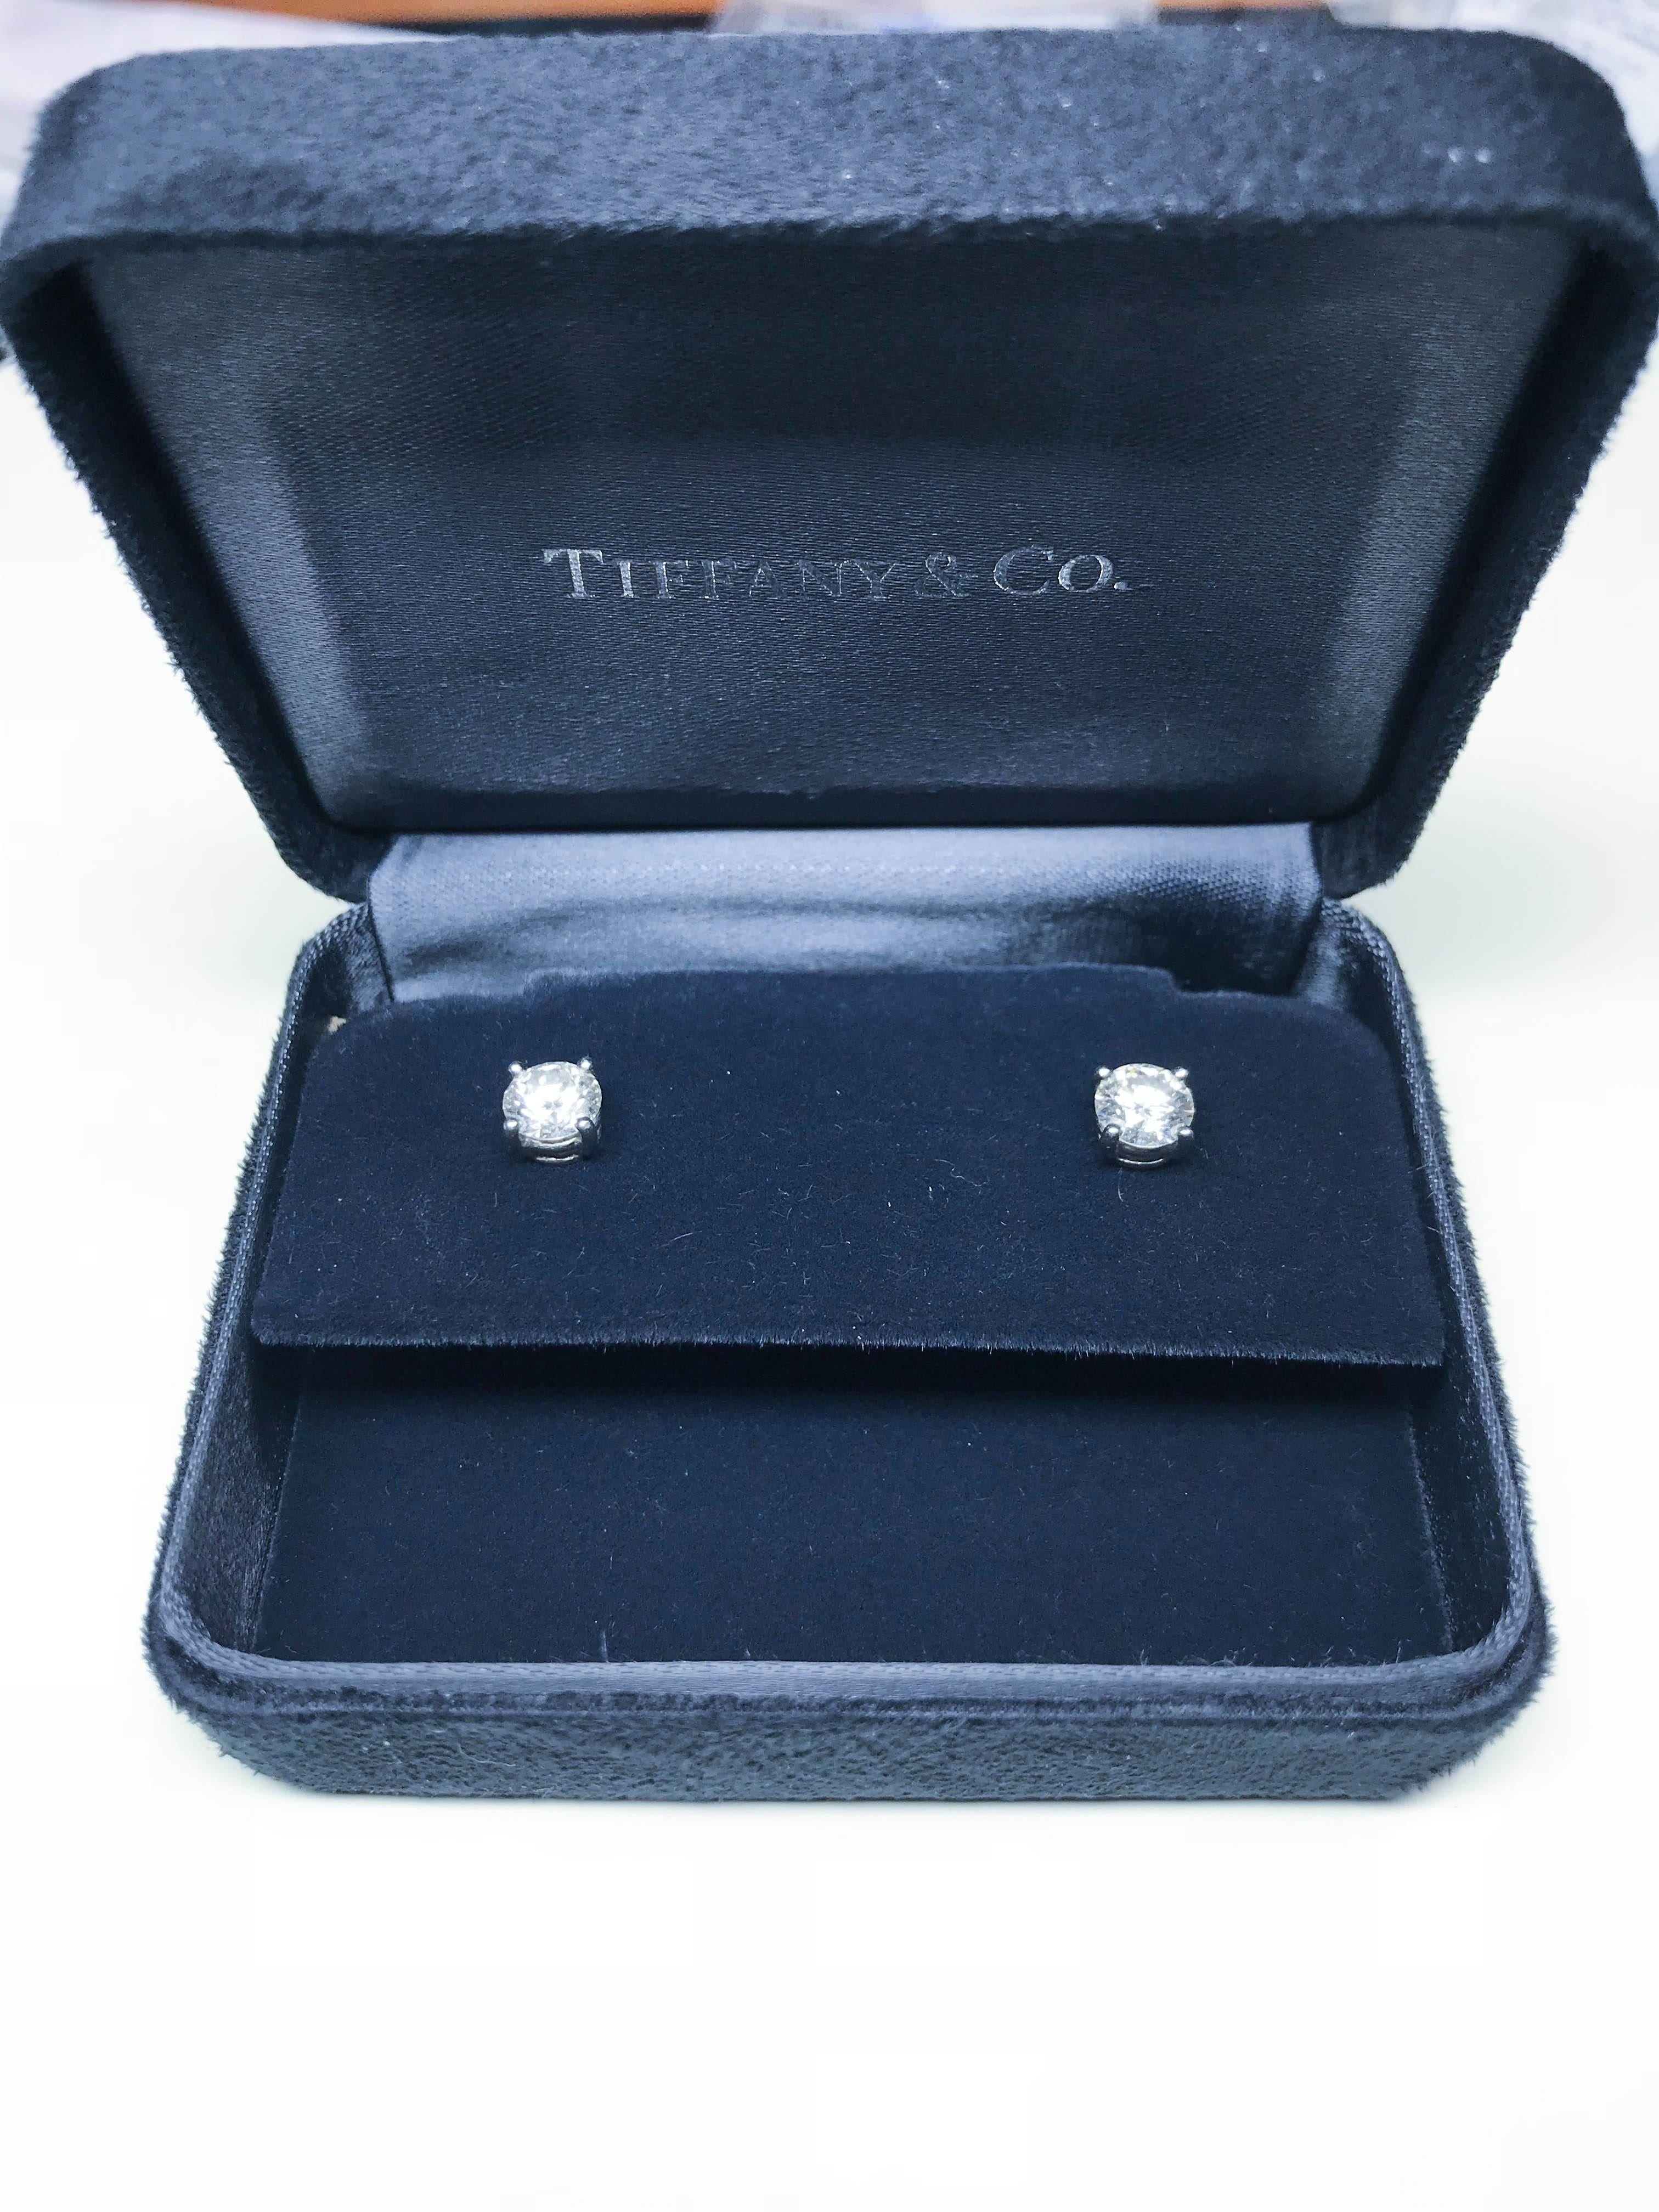 Pair of Platinum Diamond stud earrings from Tiffany & Co.,  with two GIA certified diamonds,  Each diamond weighs exactly .82 Cts,  and each is graded G color , and VS1  clarity.  
Signed 'Tiffany & Co'
Original papers and Box included
Retail